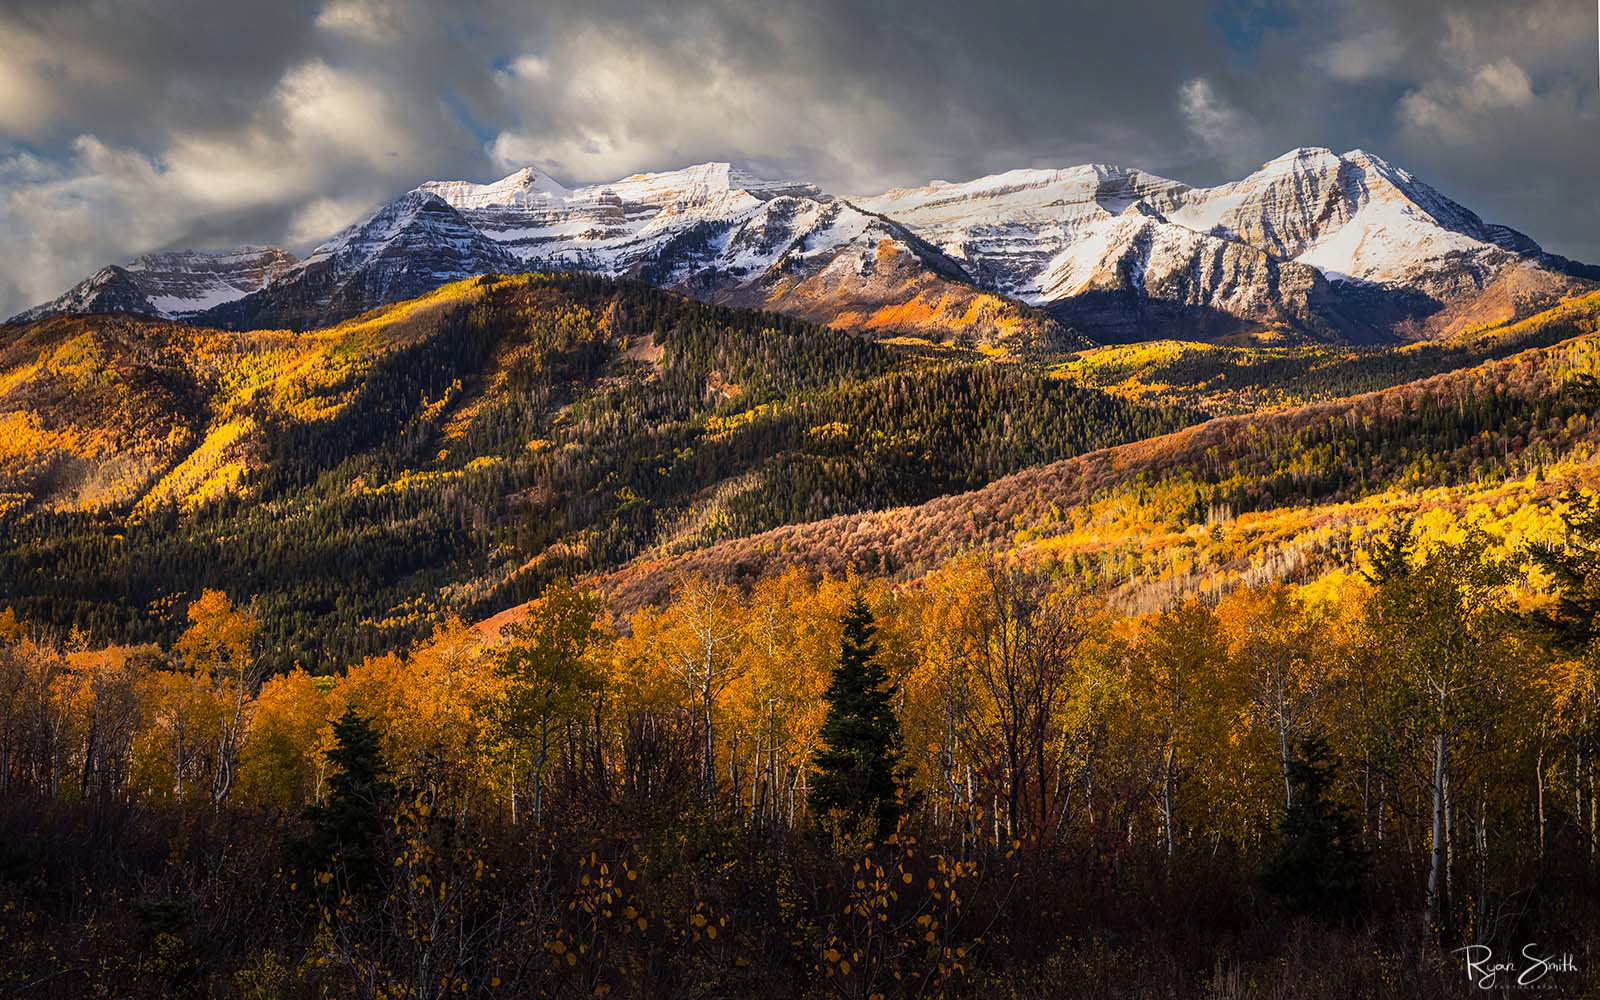 Bright yellow aspen trees are lit by sunlight with spruce trees behind them leading to a large mountain covered with a light dusting snow and clouds in the sky.